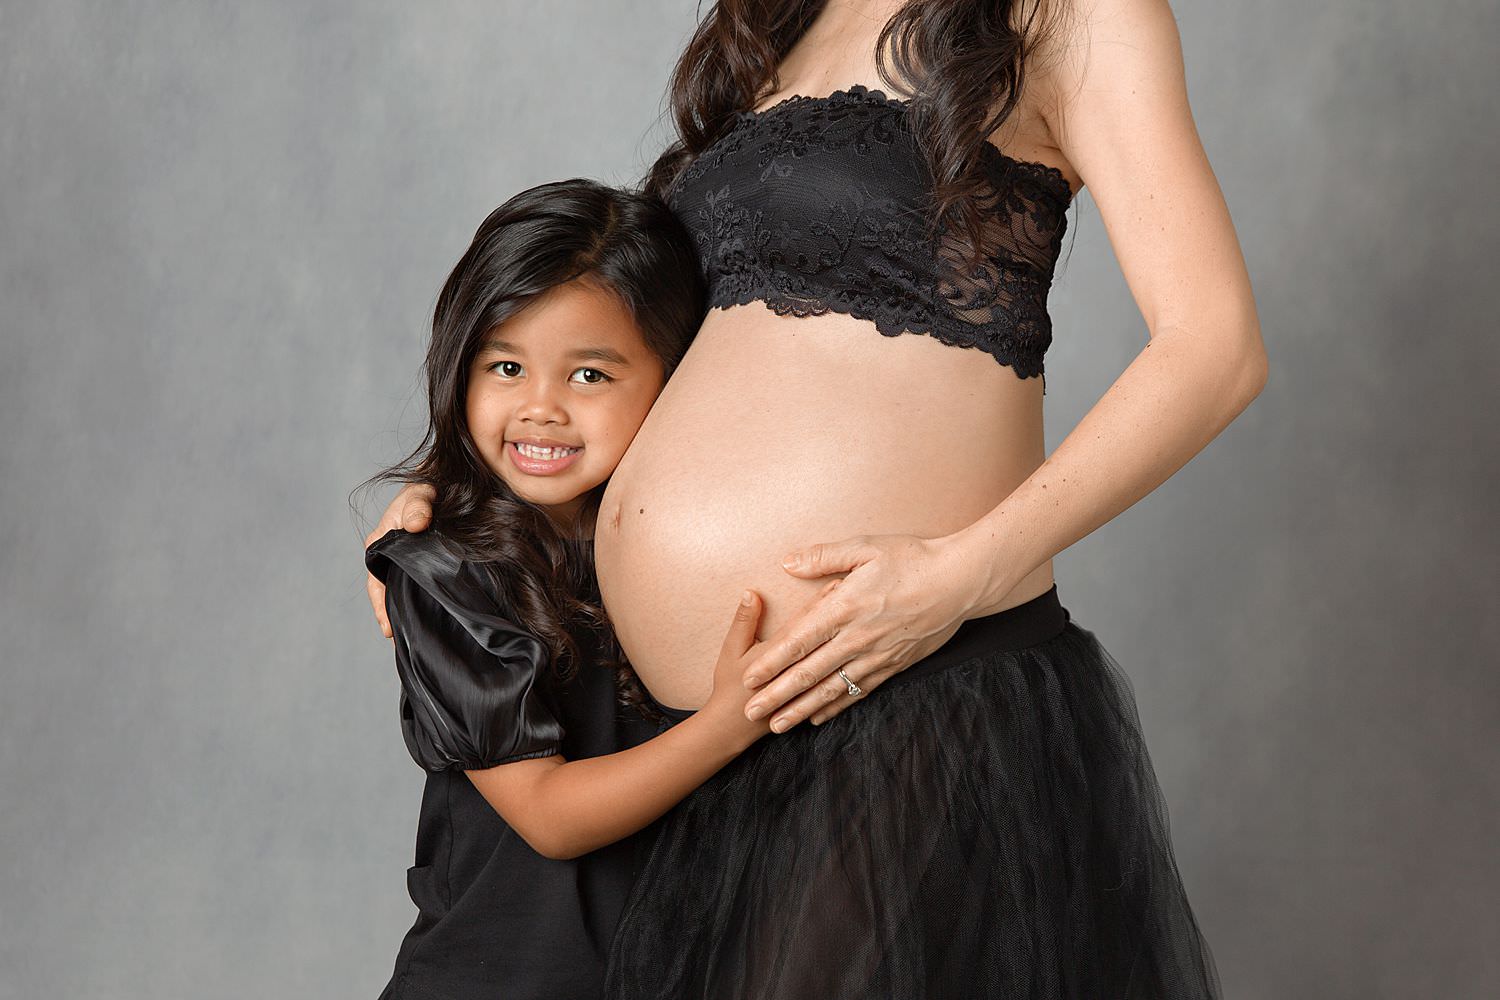 Mother-Daughter Maternity Photoshoot by Cathy Murai Photography, Orange County Maternity Photographer. Pregnant mother and her daughter, both in black dresses and holding pregnant belly, in front of gray backdrop during maternity photoshoot